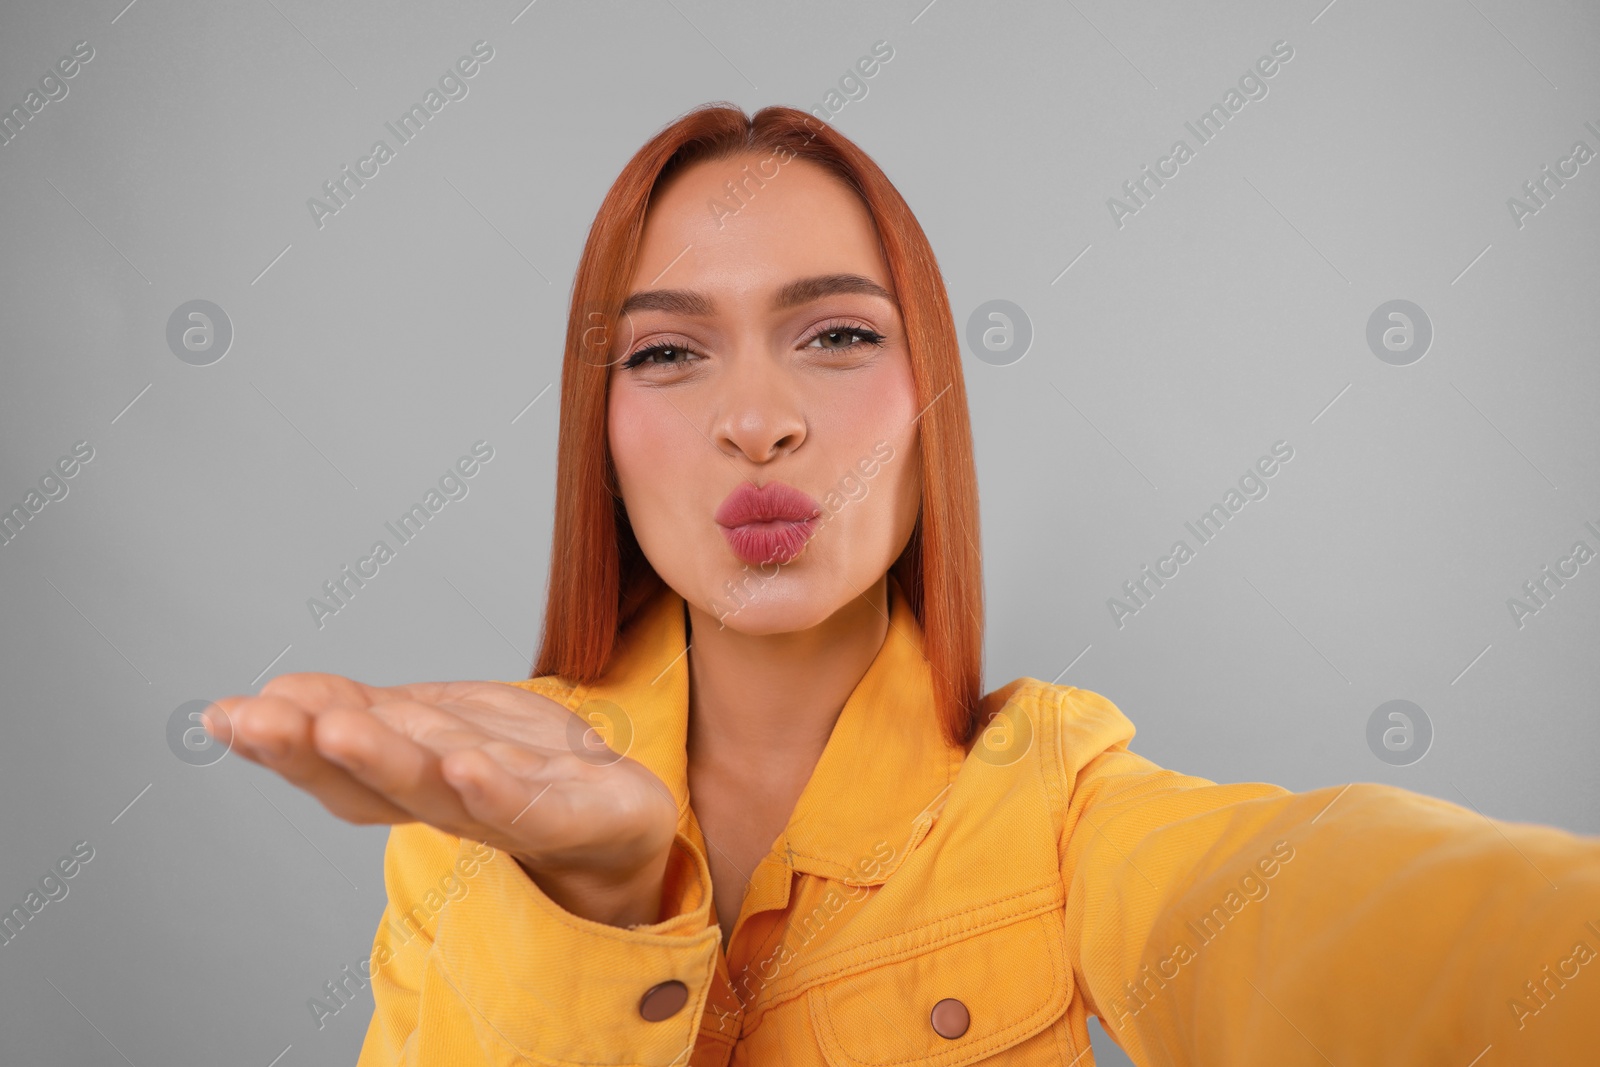 Photo of Beautiful woman taking selfie and blowing kiss on light grey background